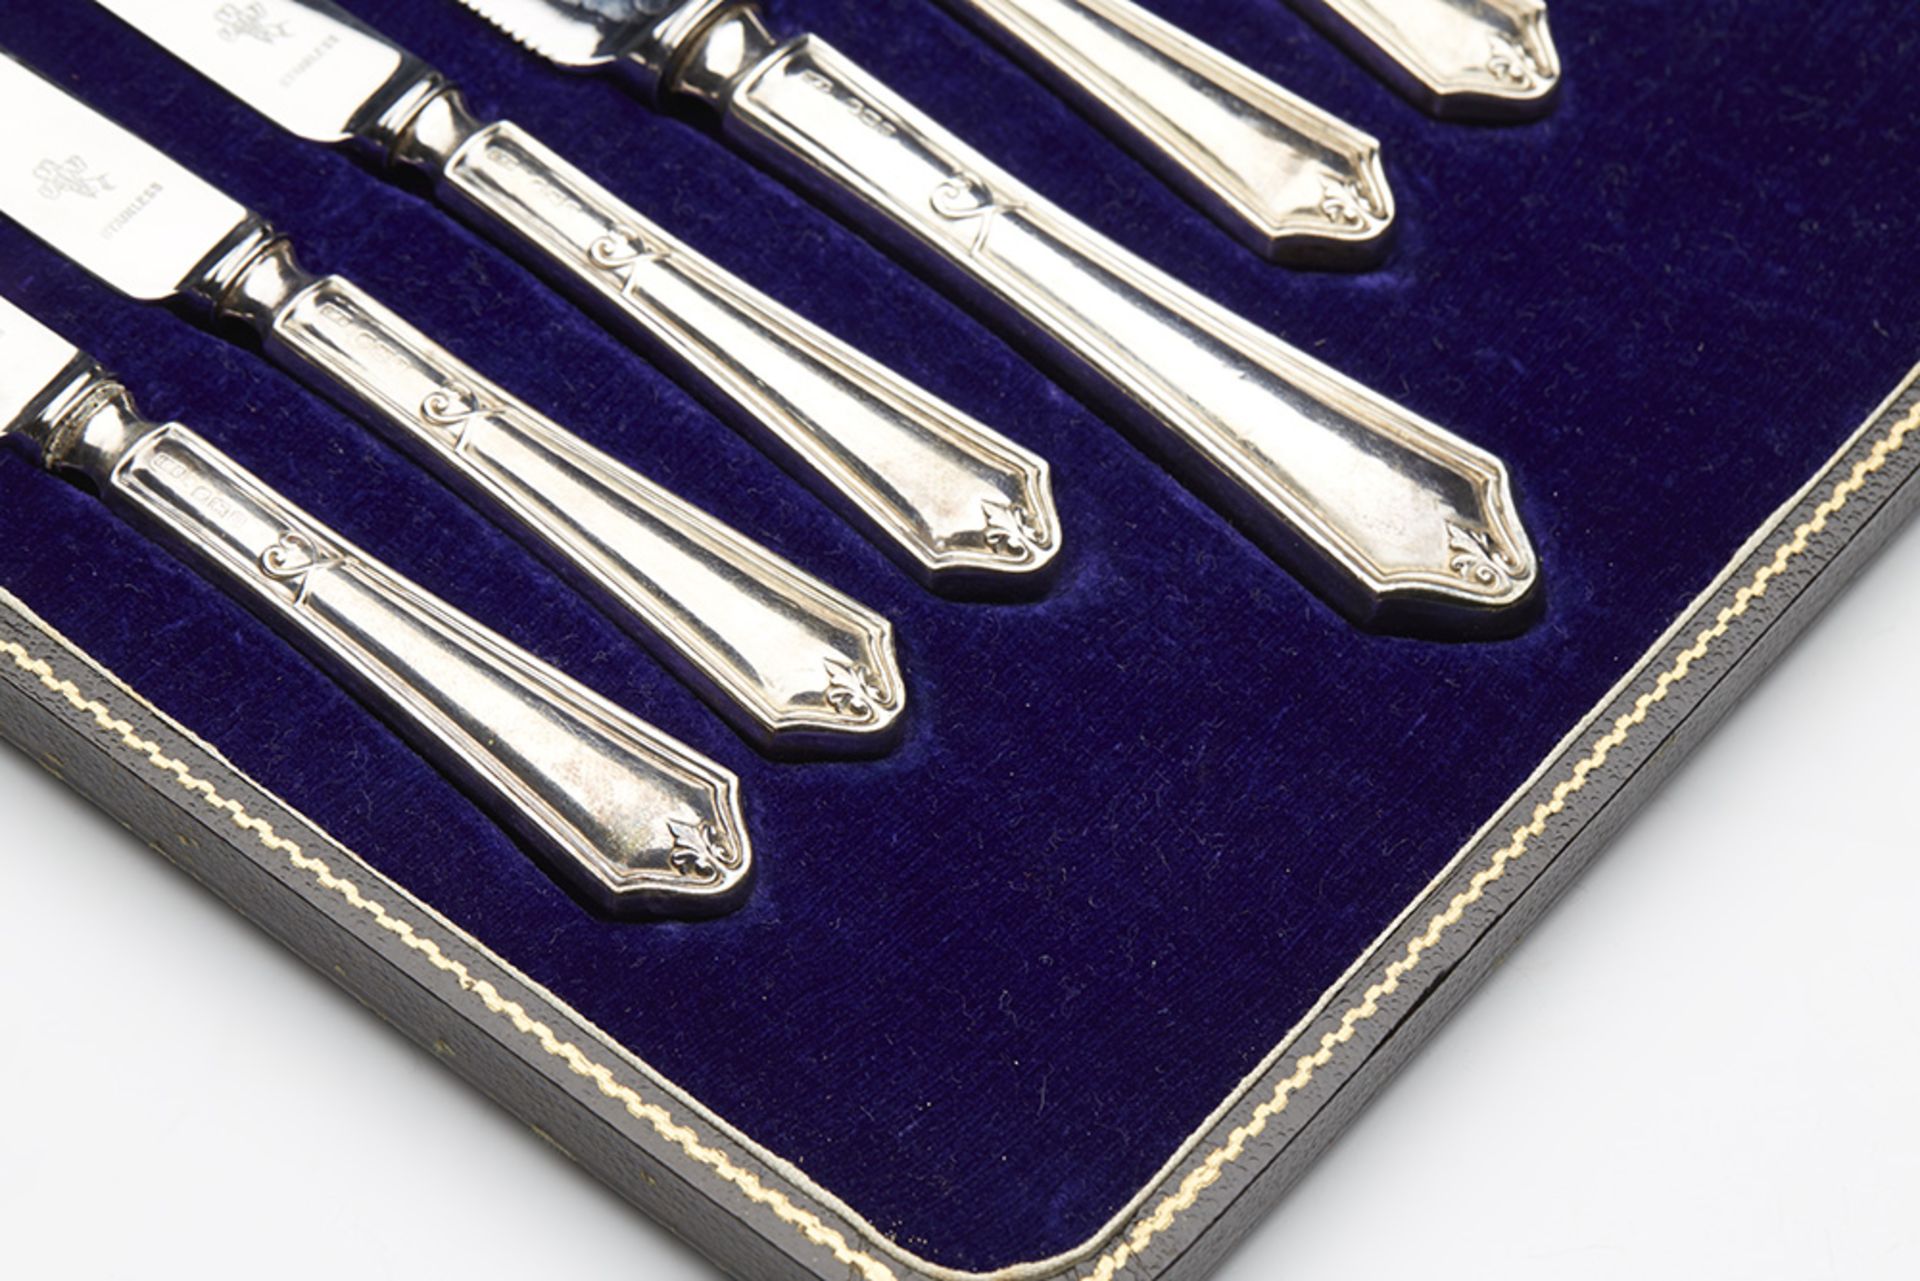 ART DECO SILVER CAKE KNIFE SET BY ATKIN BROS. 1931-33 - Image 8 of 12